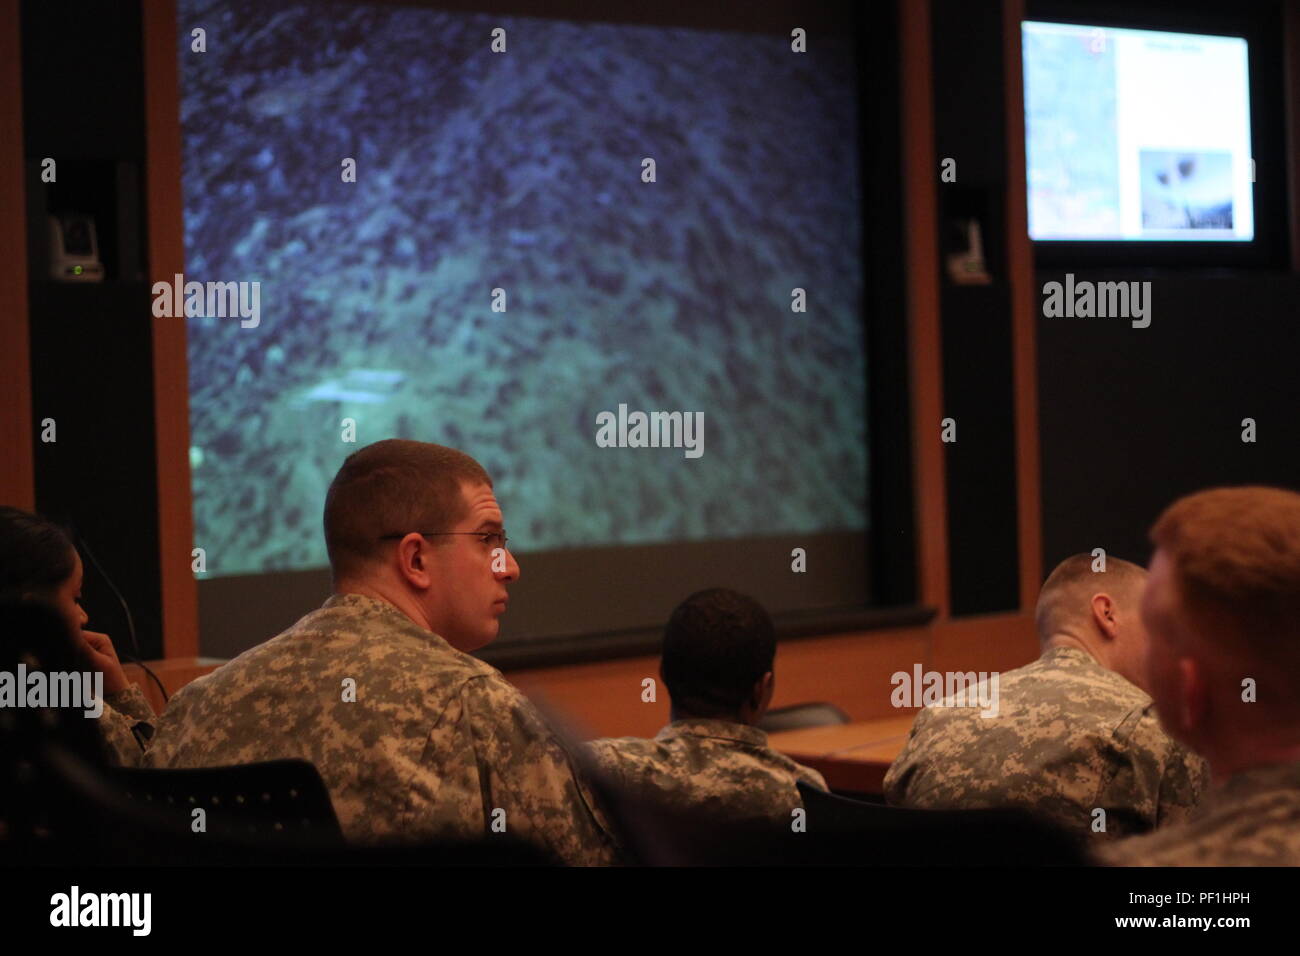 Cadets from Princeton, Rutgers, and Seton Hall universities participate in a virtual staff ride of the battle of Wanat in Afghanistan. The cadets were able to 'fly' through the terrain using computer-generated imagery. Stock Photo